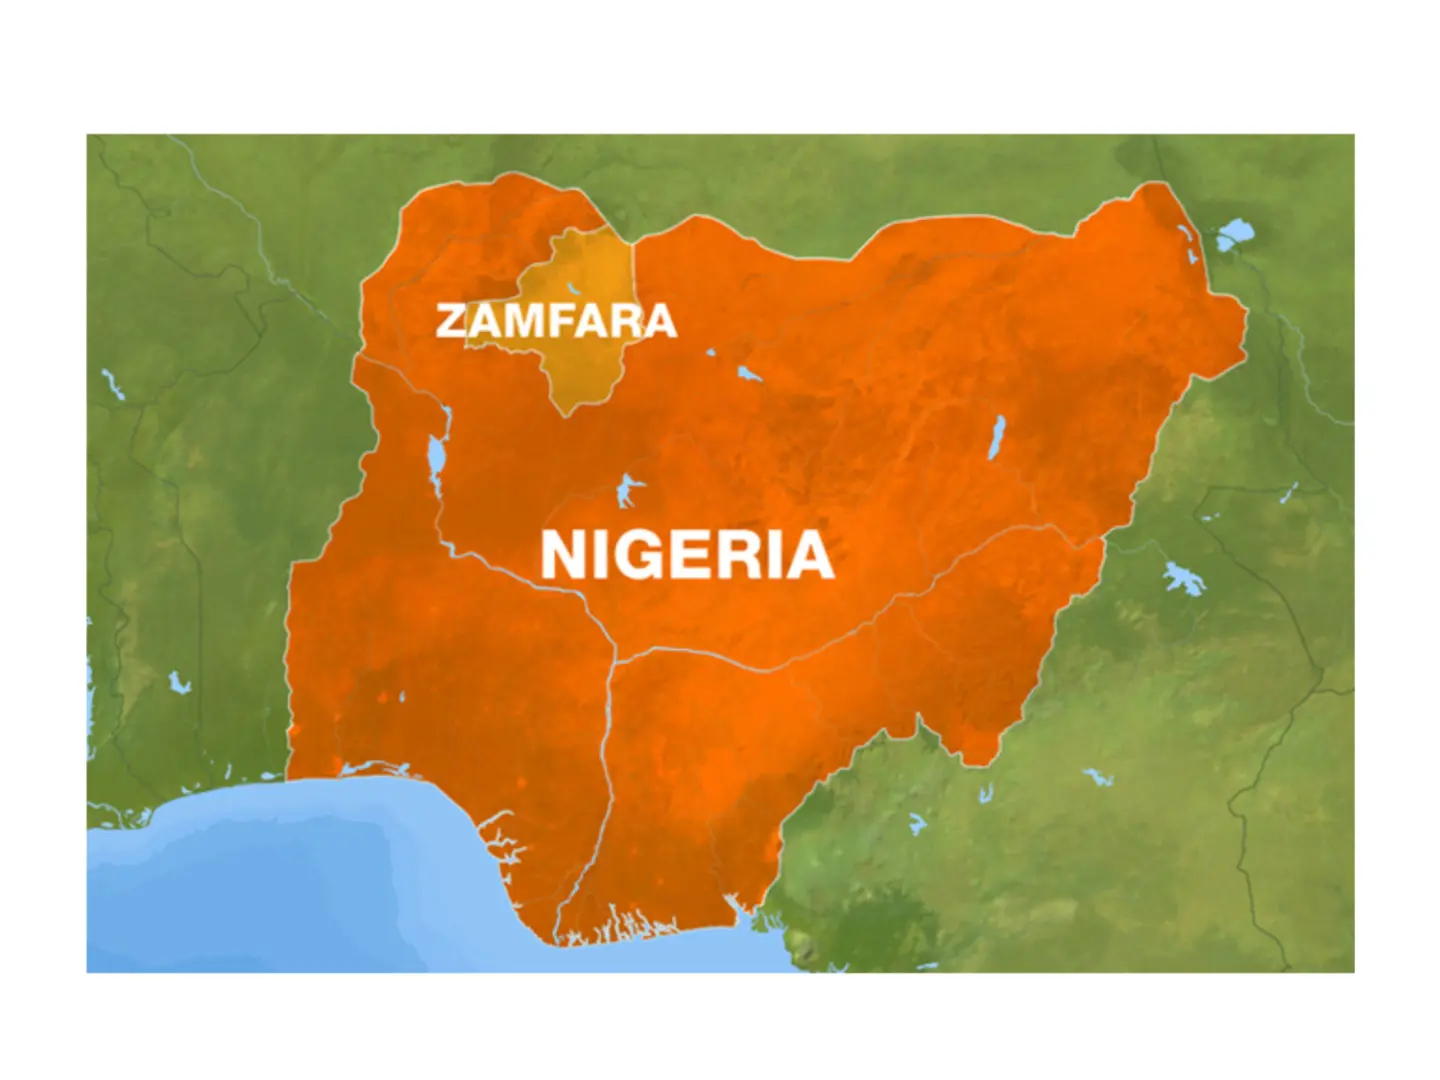 Notorious bandits Kachallah, Madagwal, 12 others killed in faceoff with rival groups in Zamfara